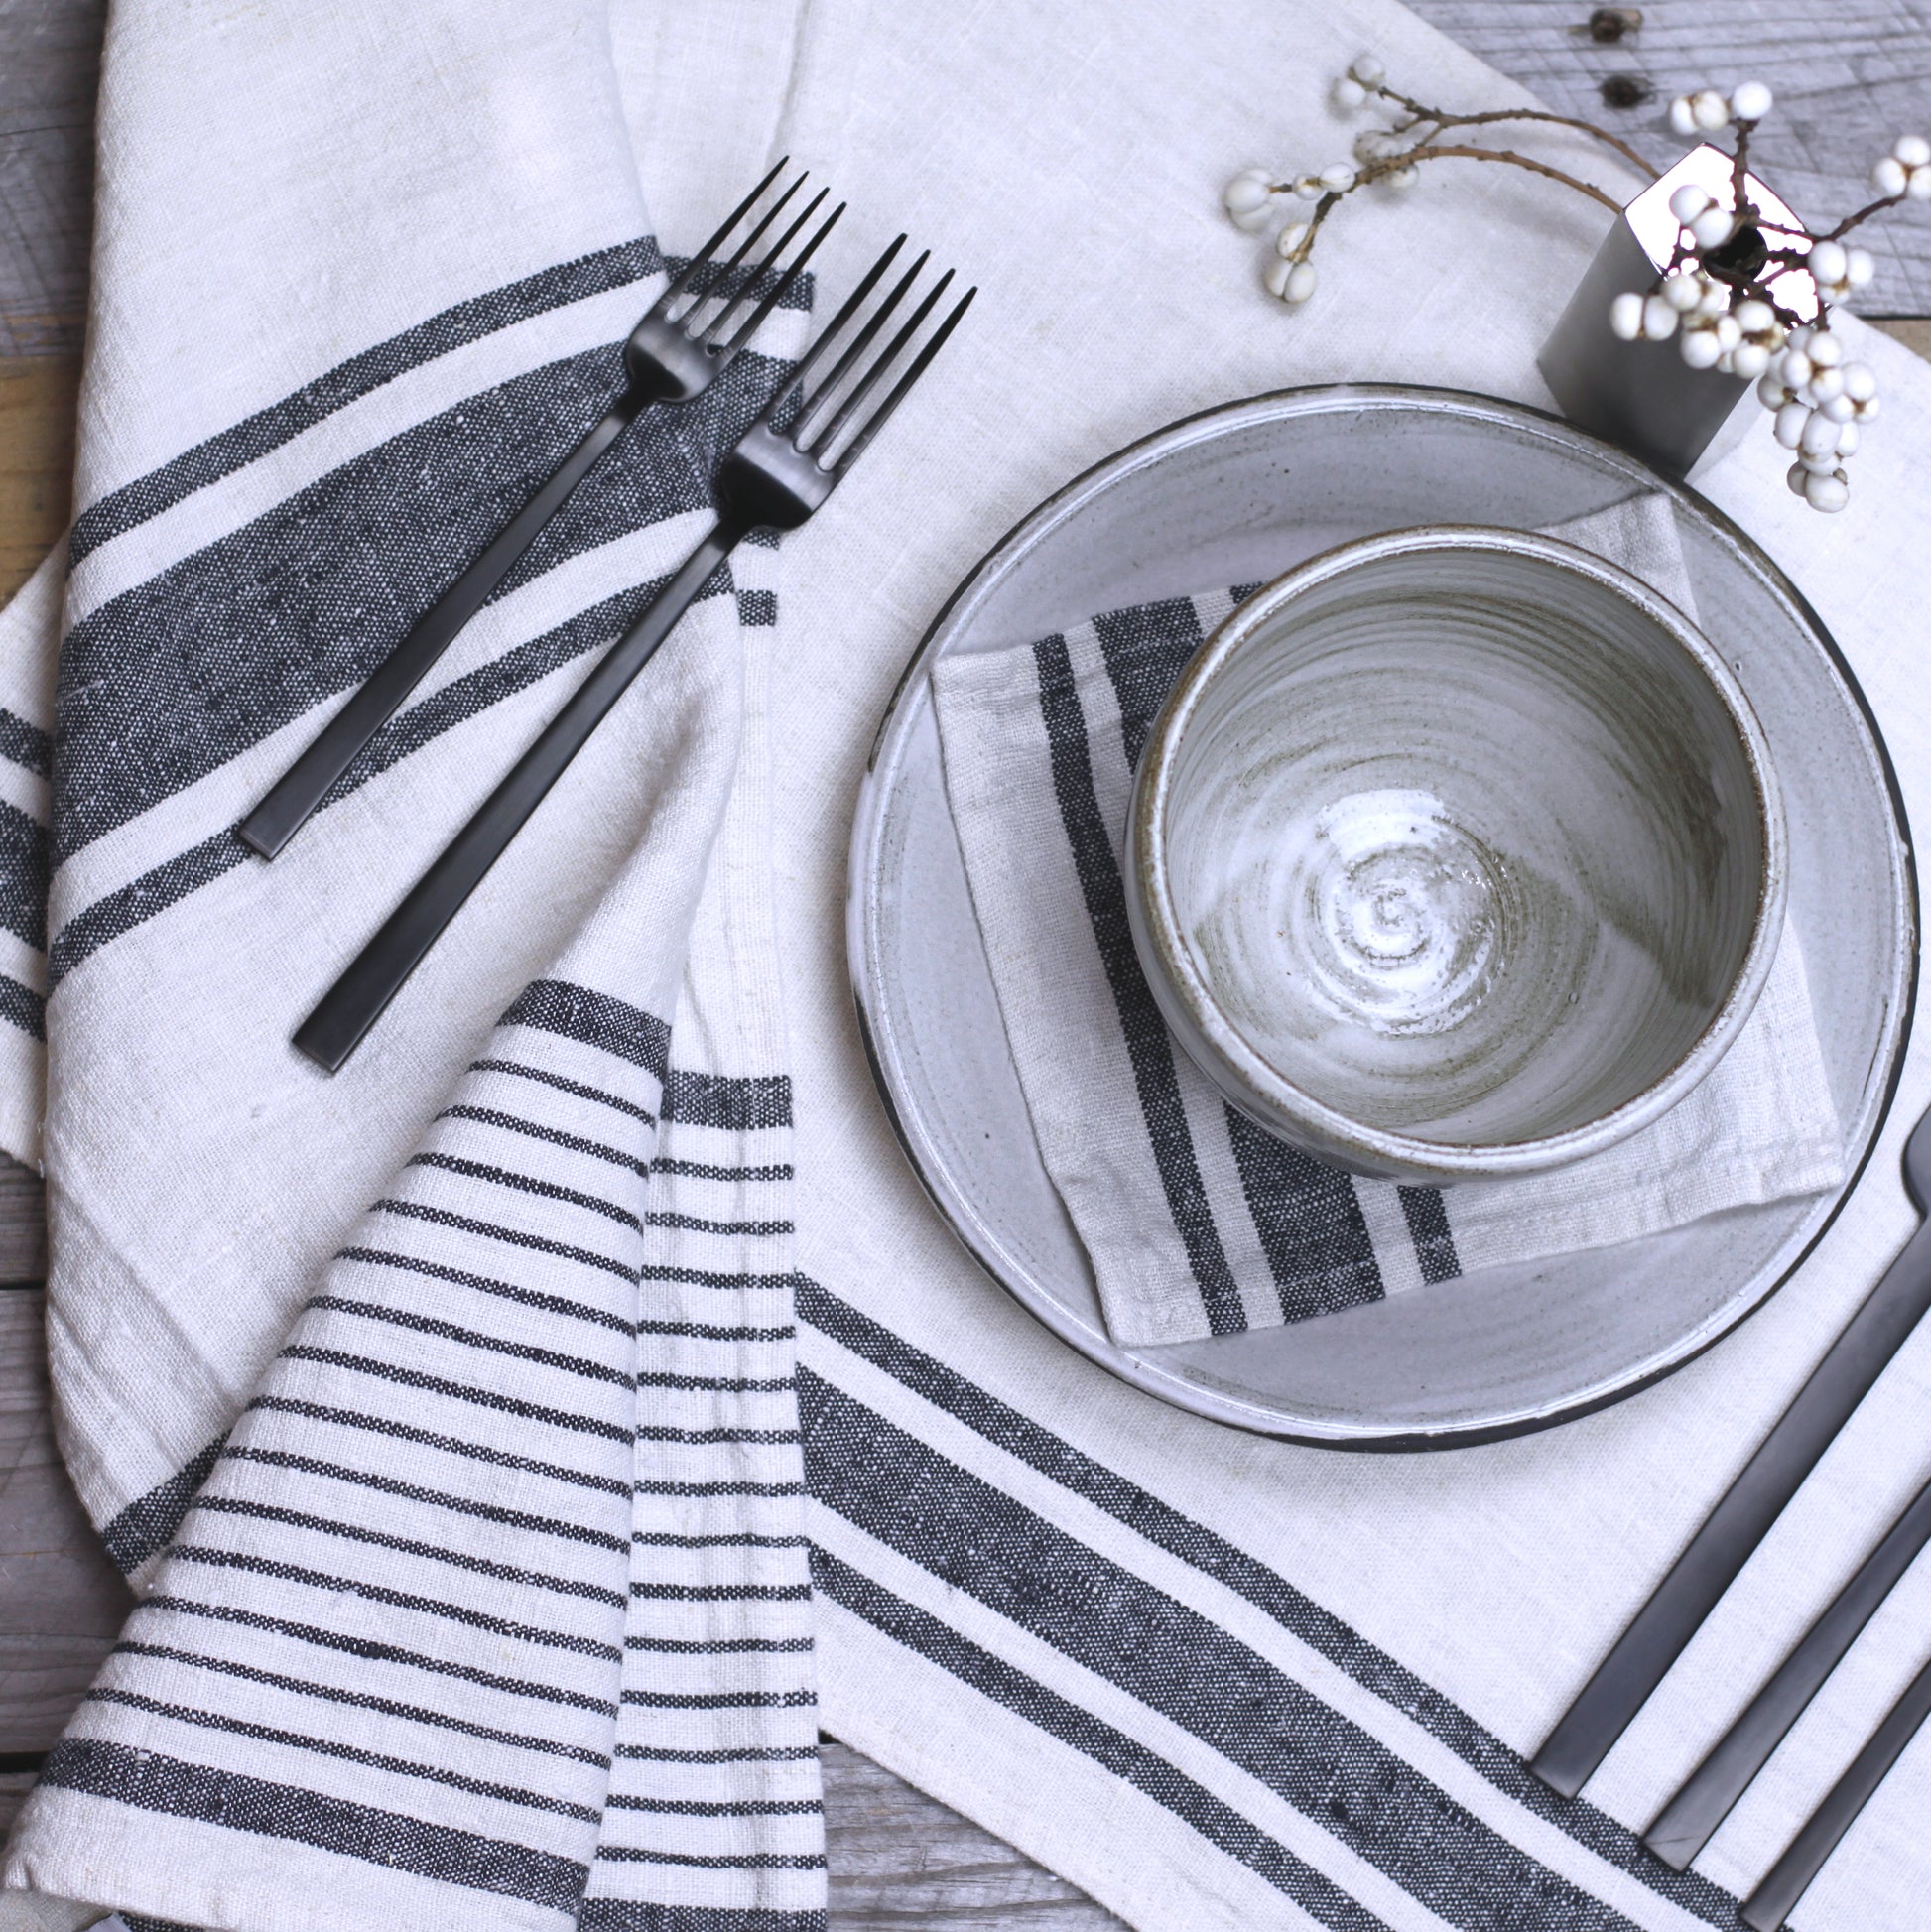 Stonewashed linen - pure 100% linen cocktail napkin or coaster antique white  with black stripes stone washed flax pre-washed laundered Europe European linen  napkins set – L i n e n C a s a